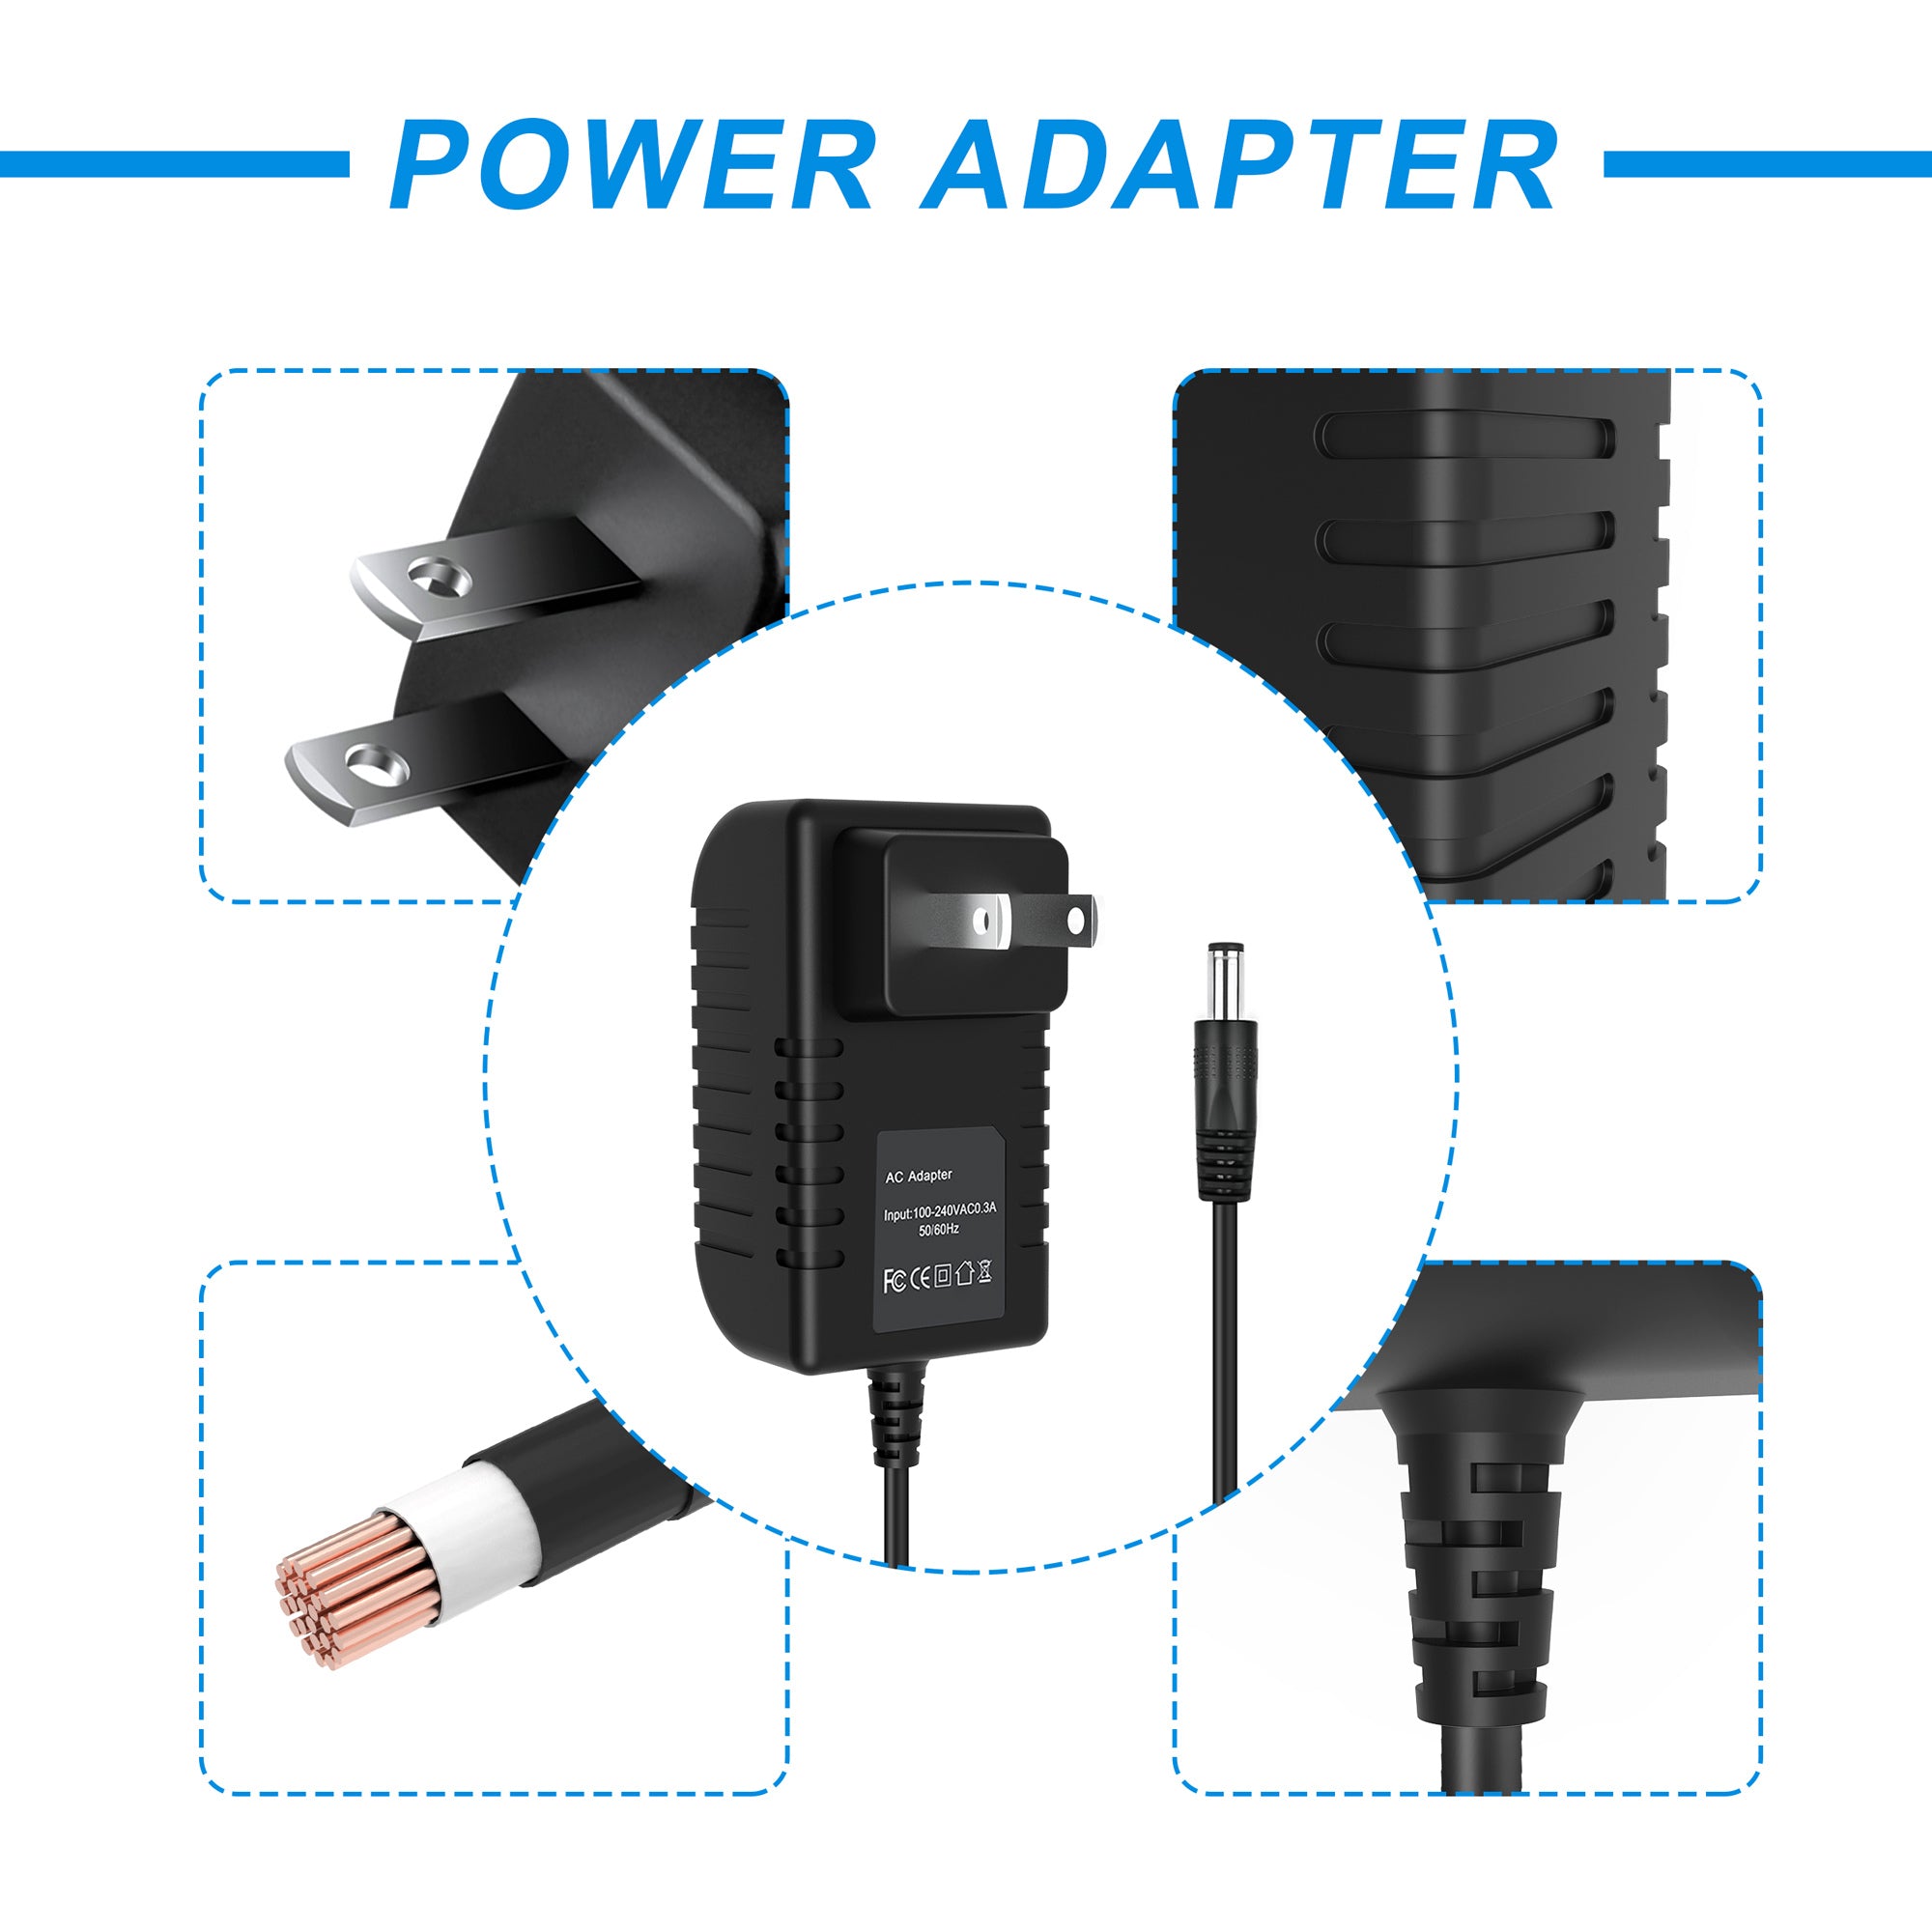 AbleGrid 6V AC/DC Adapter Compatible with Precor C846 Upright Stationary Bike 6C 7D EH ER F9/NM P7 P8 6B 7C DM EP/NN P9 PA Exercise 6VDC 6 Volt Output Power Supply Cord Charger (NOT 12V output. )